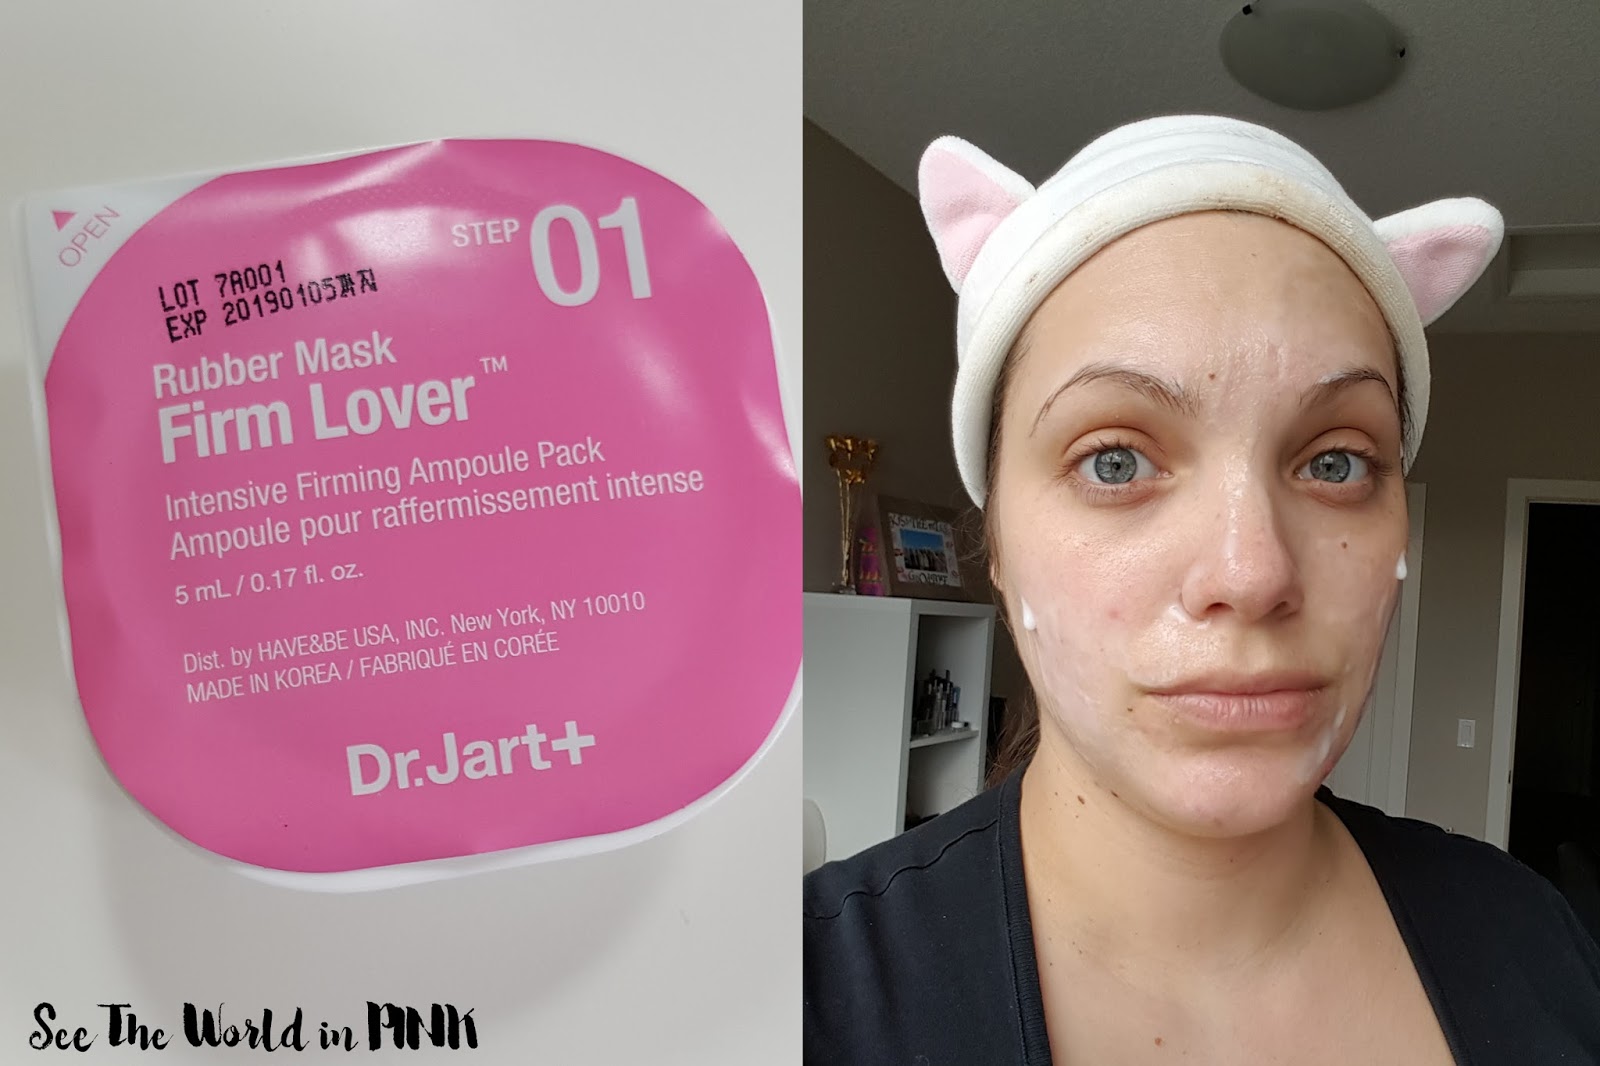 Dr. Jart+ Firm Lover Rubber Mask Review 